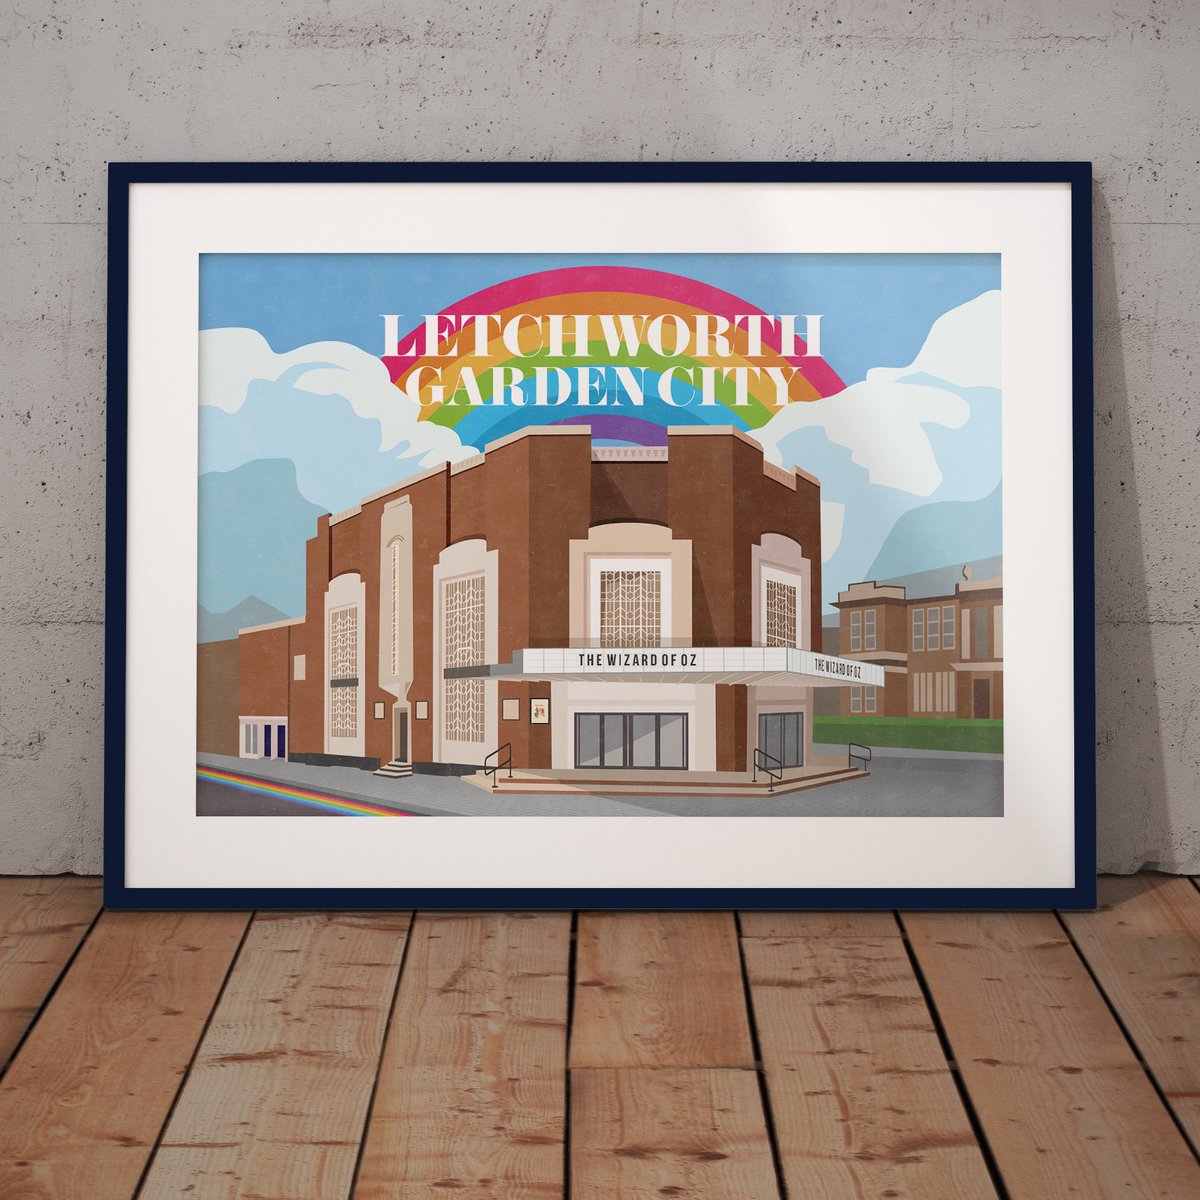 Raising funds for The Garden House Hospice, #letchworthgardencity gets its 🌈 over the @Broadway_Cinema Visit Brothershipstudio.com to get your print! #hertford #herts #hertfordshire #nhs @LoveLetchworth @DiscoverLGC @LetchworthGC